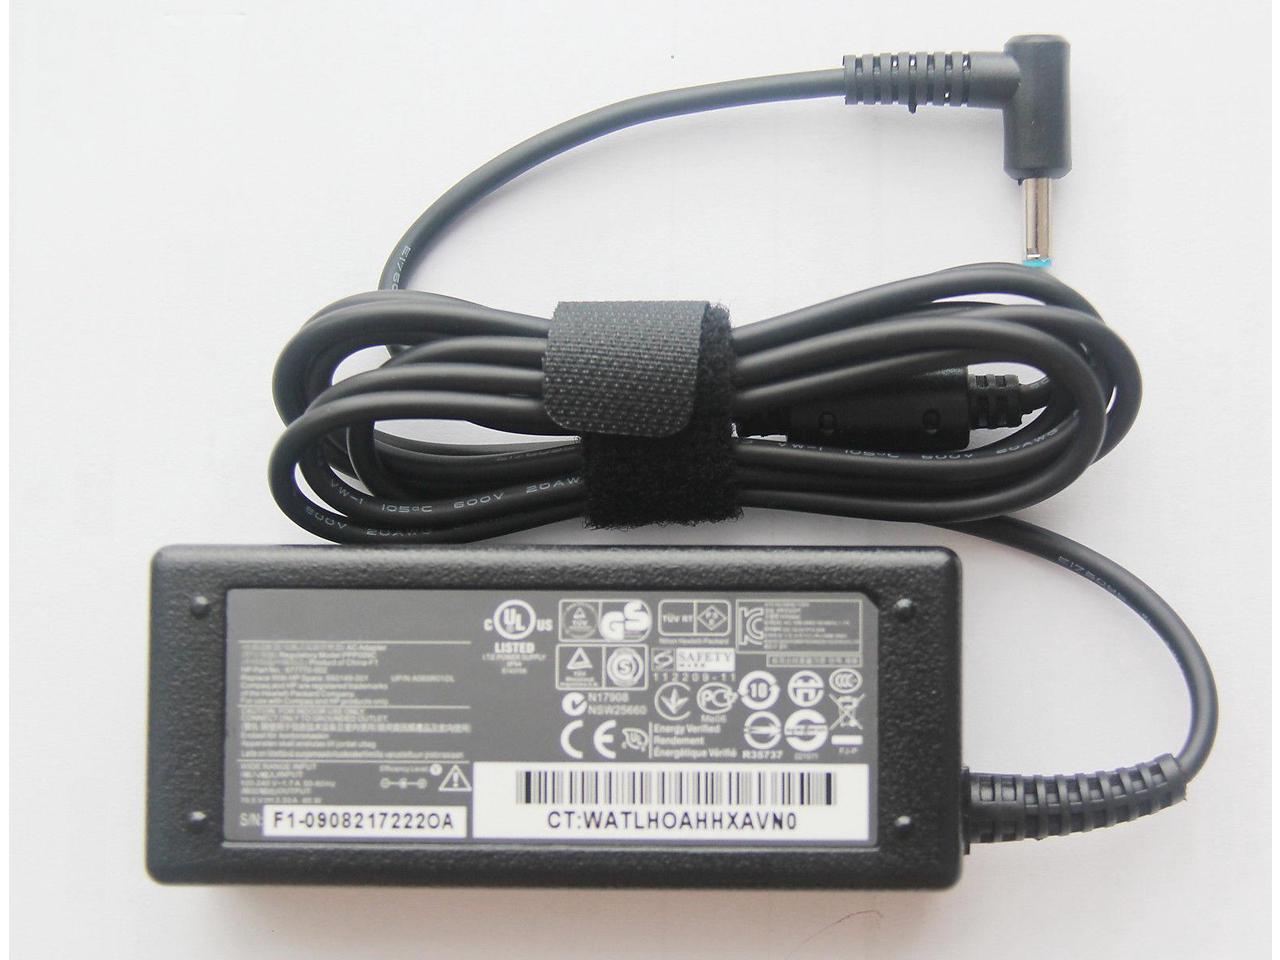 Power Supply Adapter Laptop Charger For Hp Probook 450 G3 Notebook Pc Newegg Com